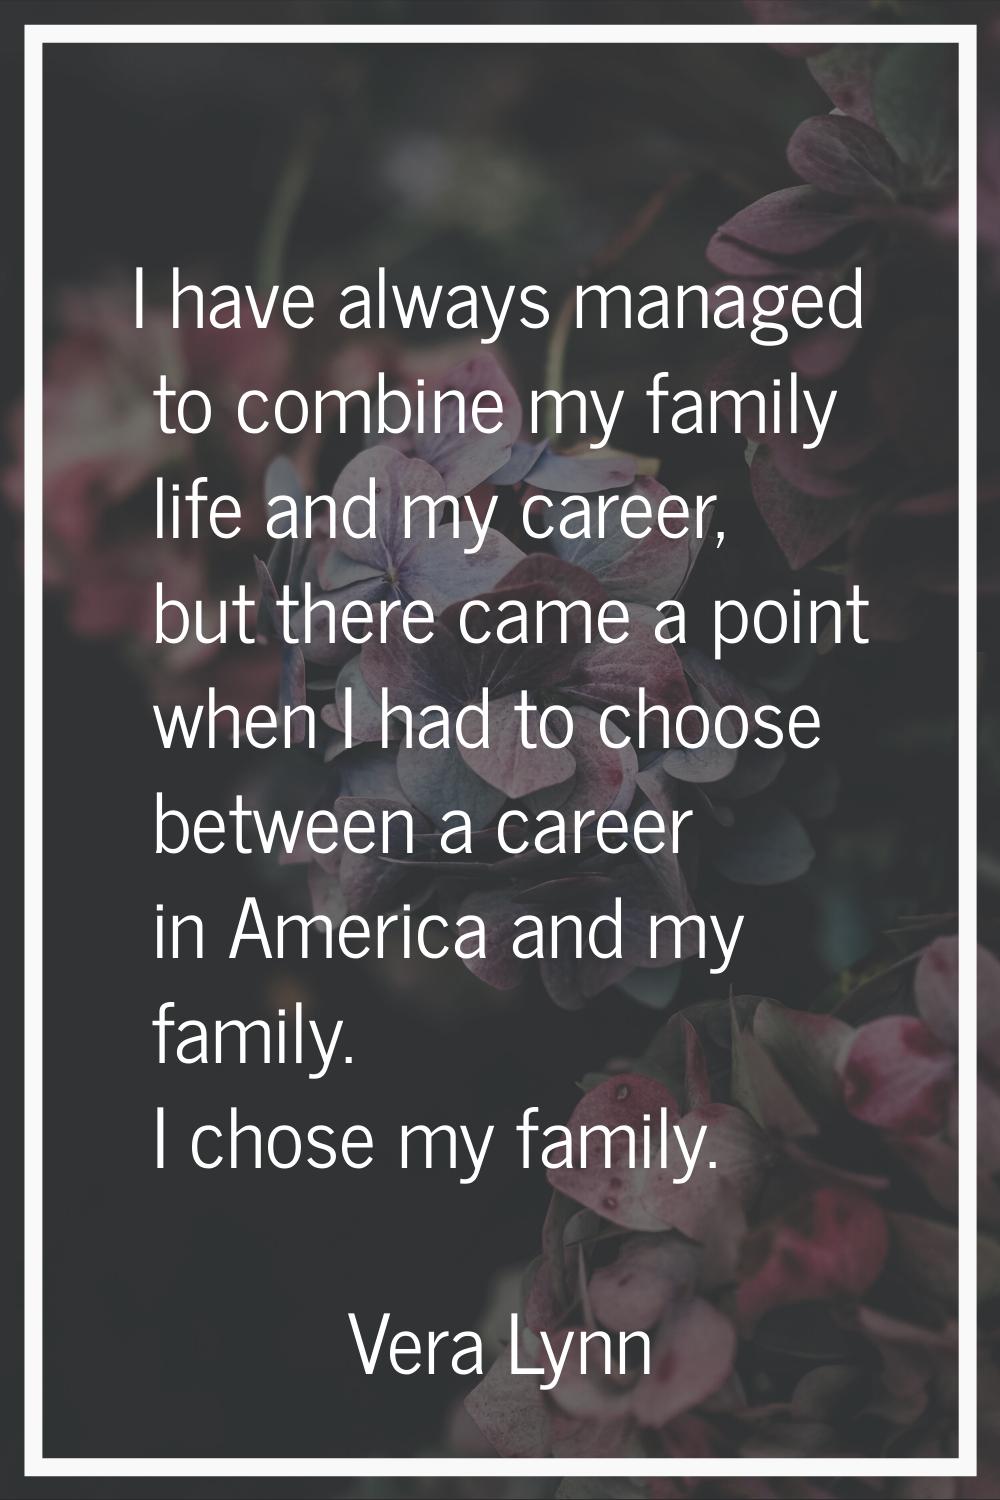 I have always managed to combine my family life and my career, but there came a point when I had to